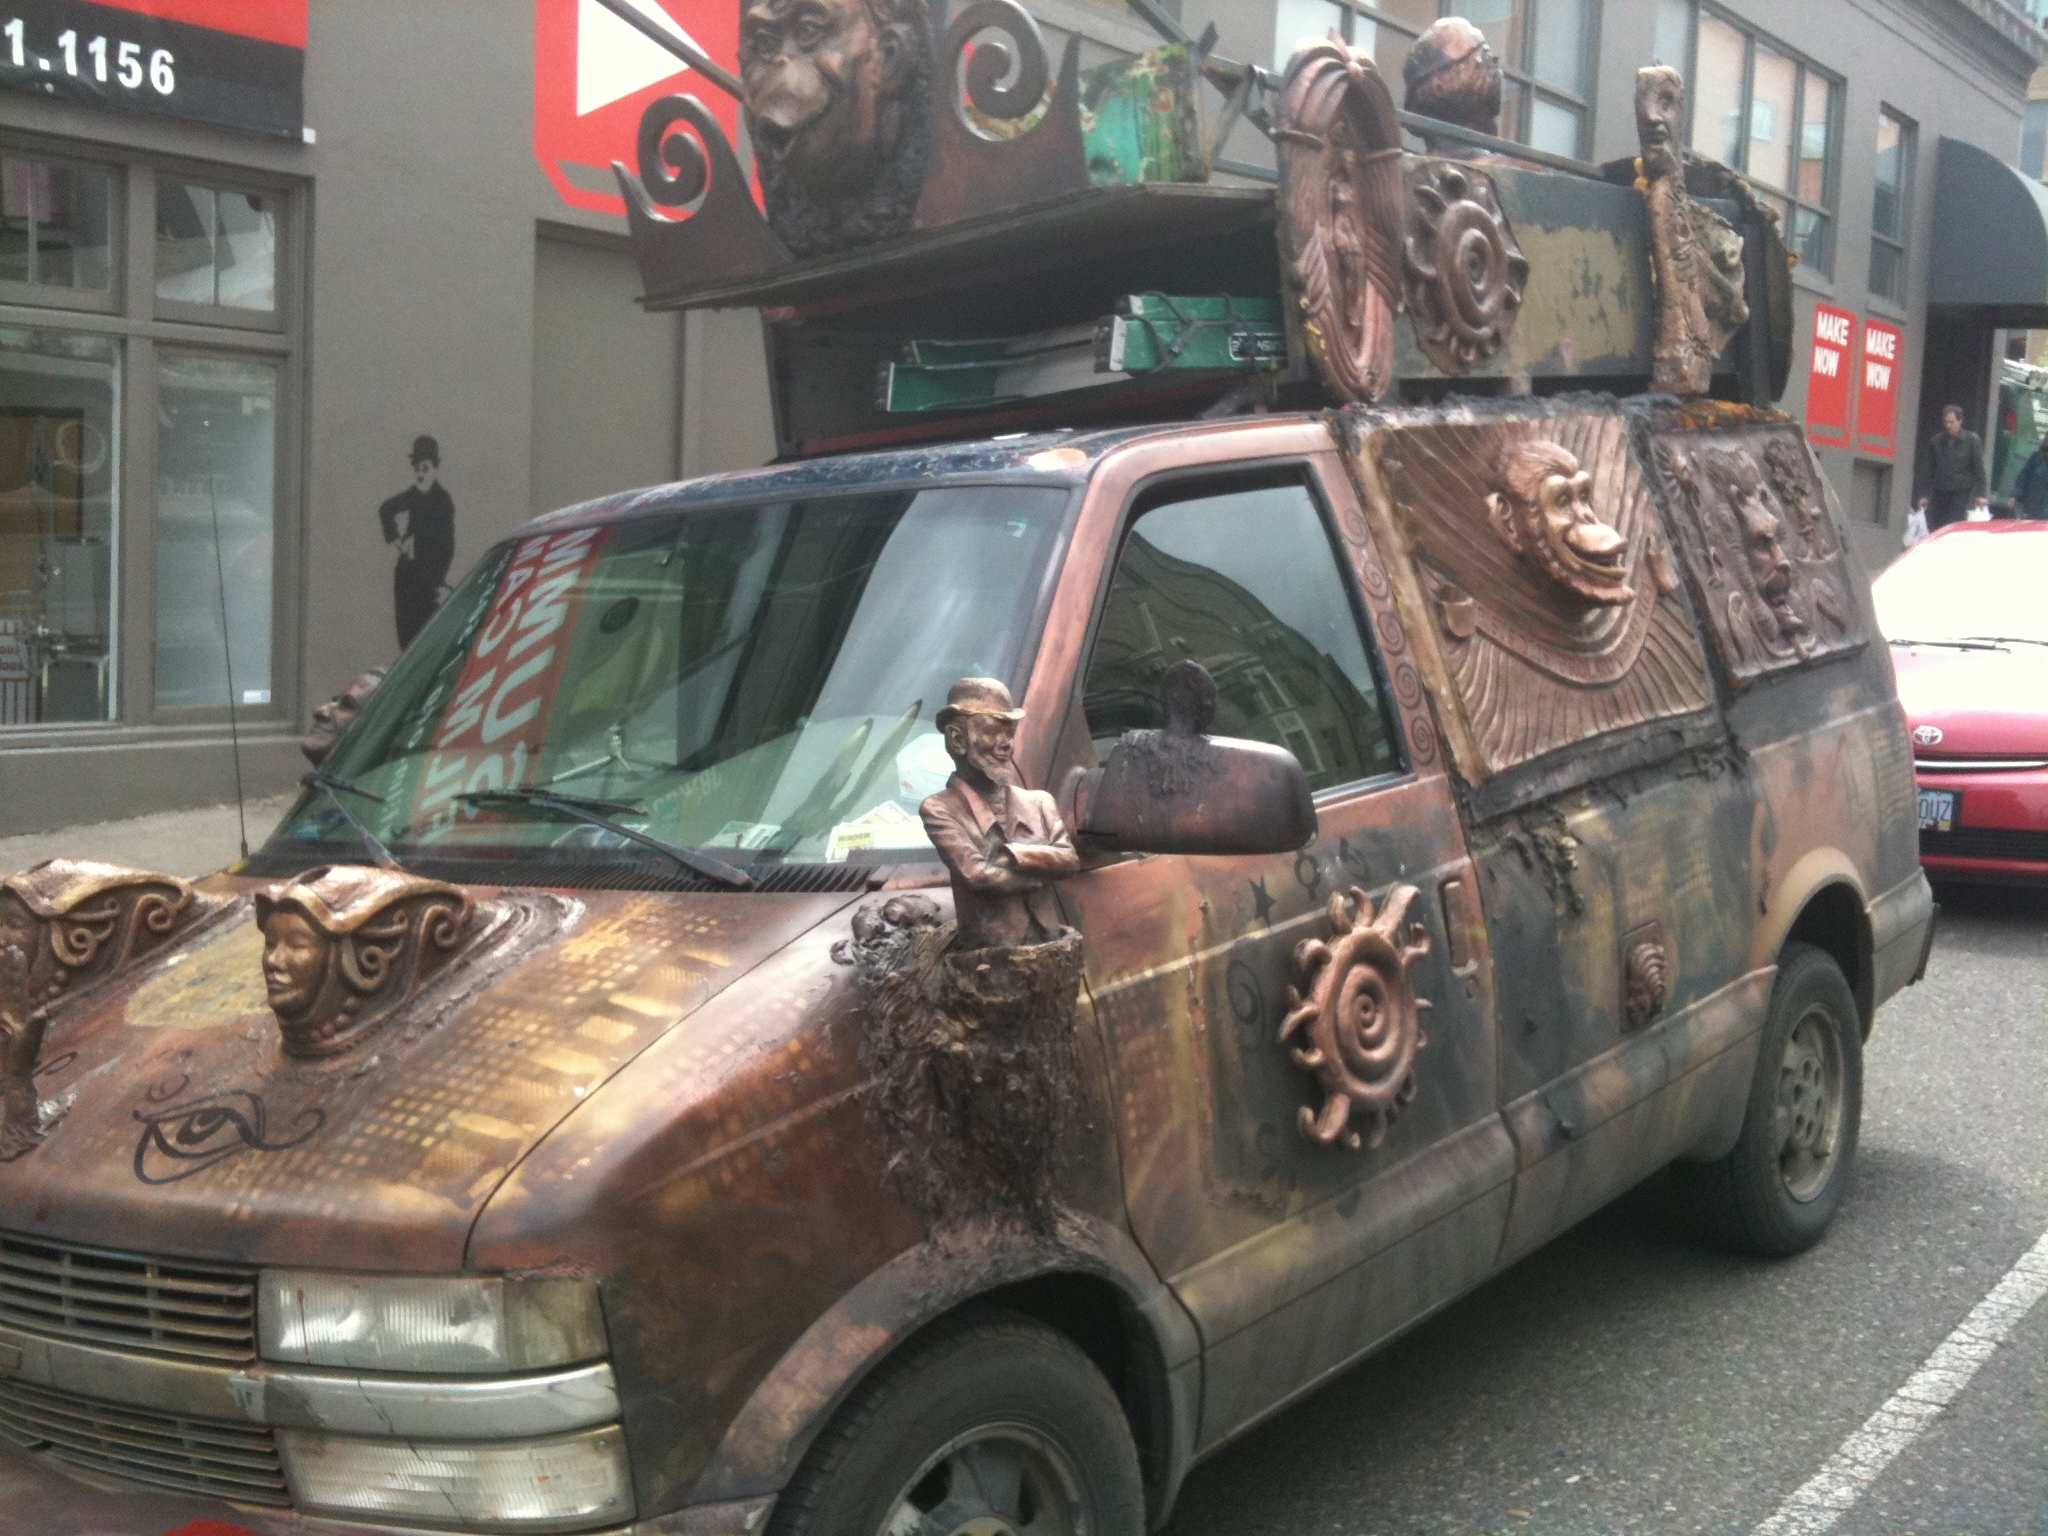 This guy had some time on his hands.  Only in Portland!